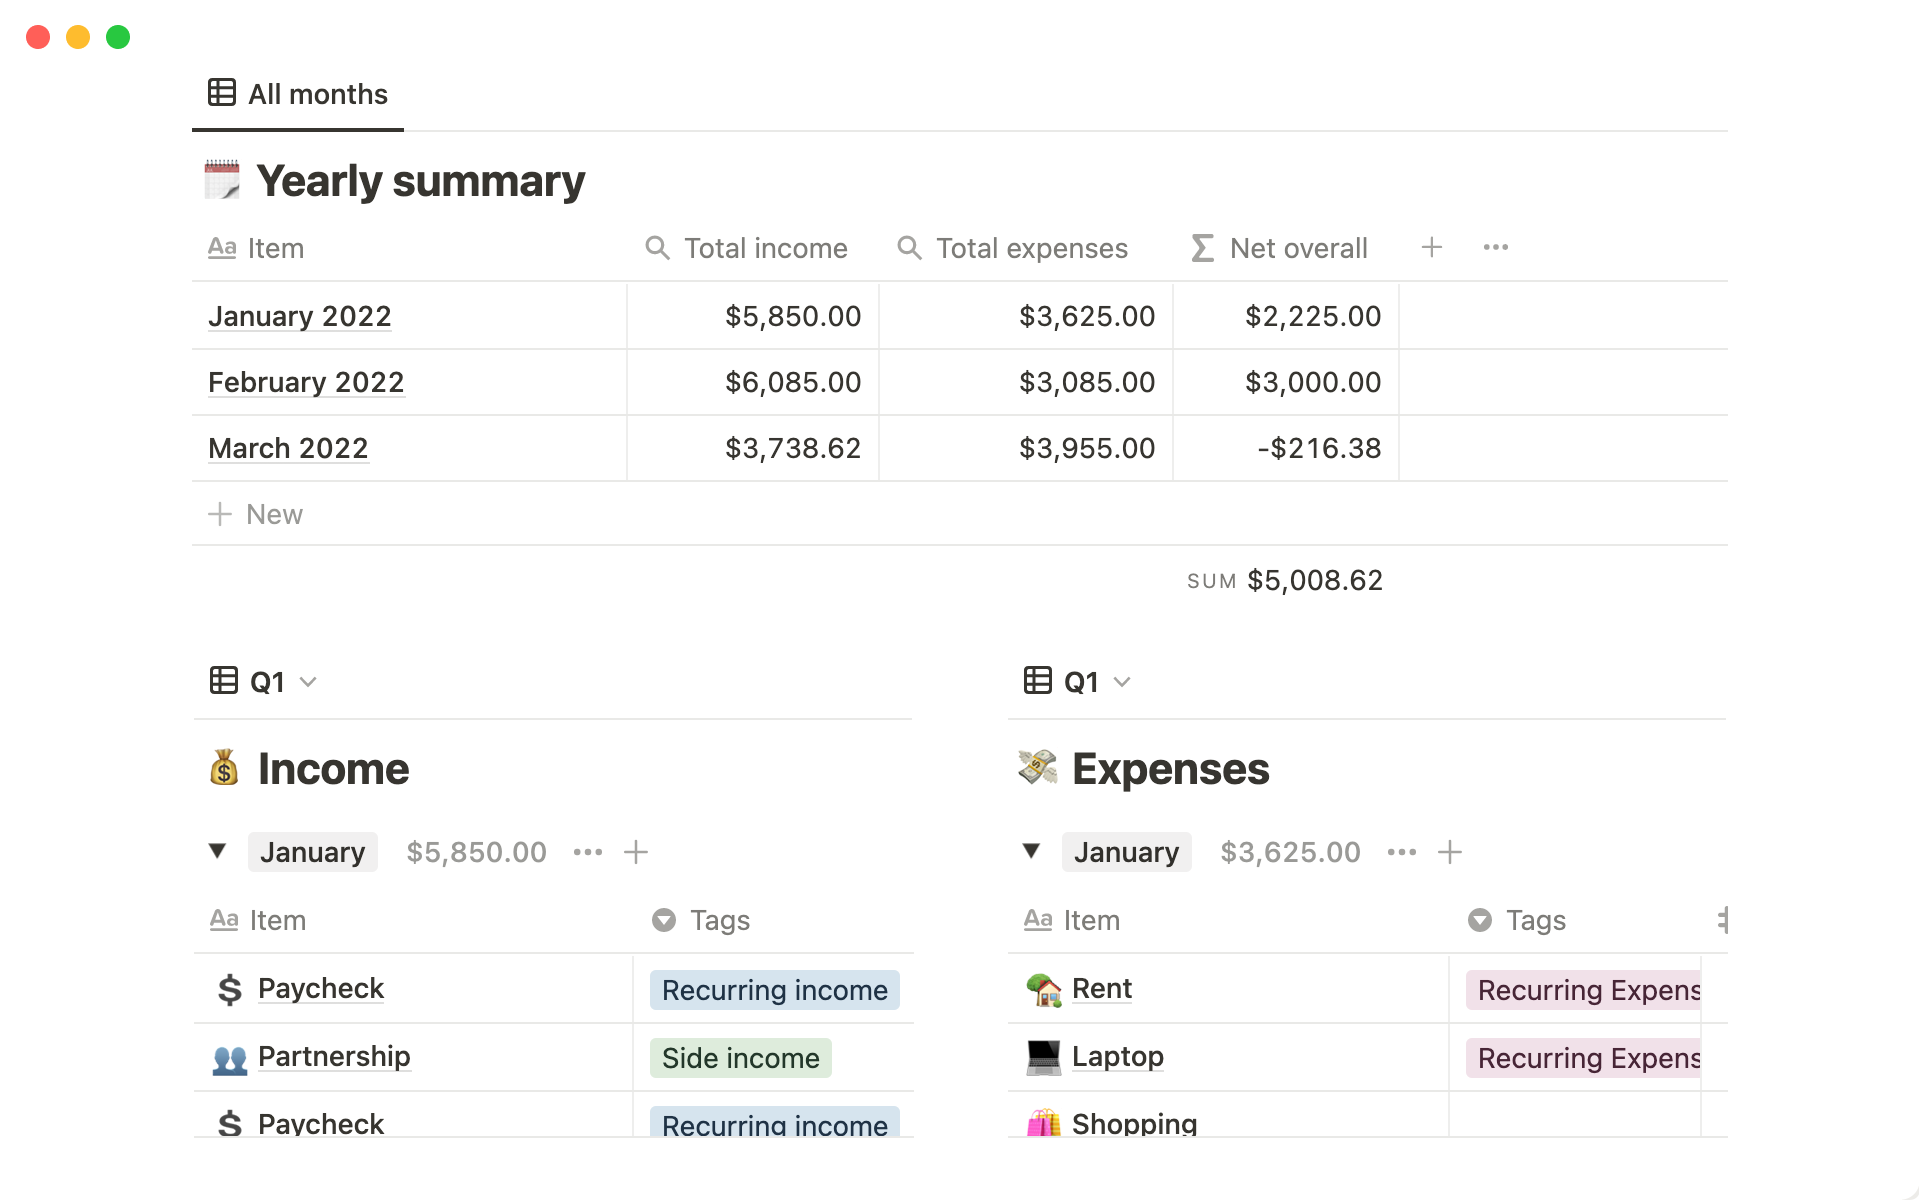 This free financial tracker helps you track your income and expenses month by month. It's the same system Humphrey Yang (@humphreytalks) uses in his day to day life, accurately recording all transactions.